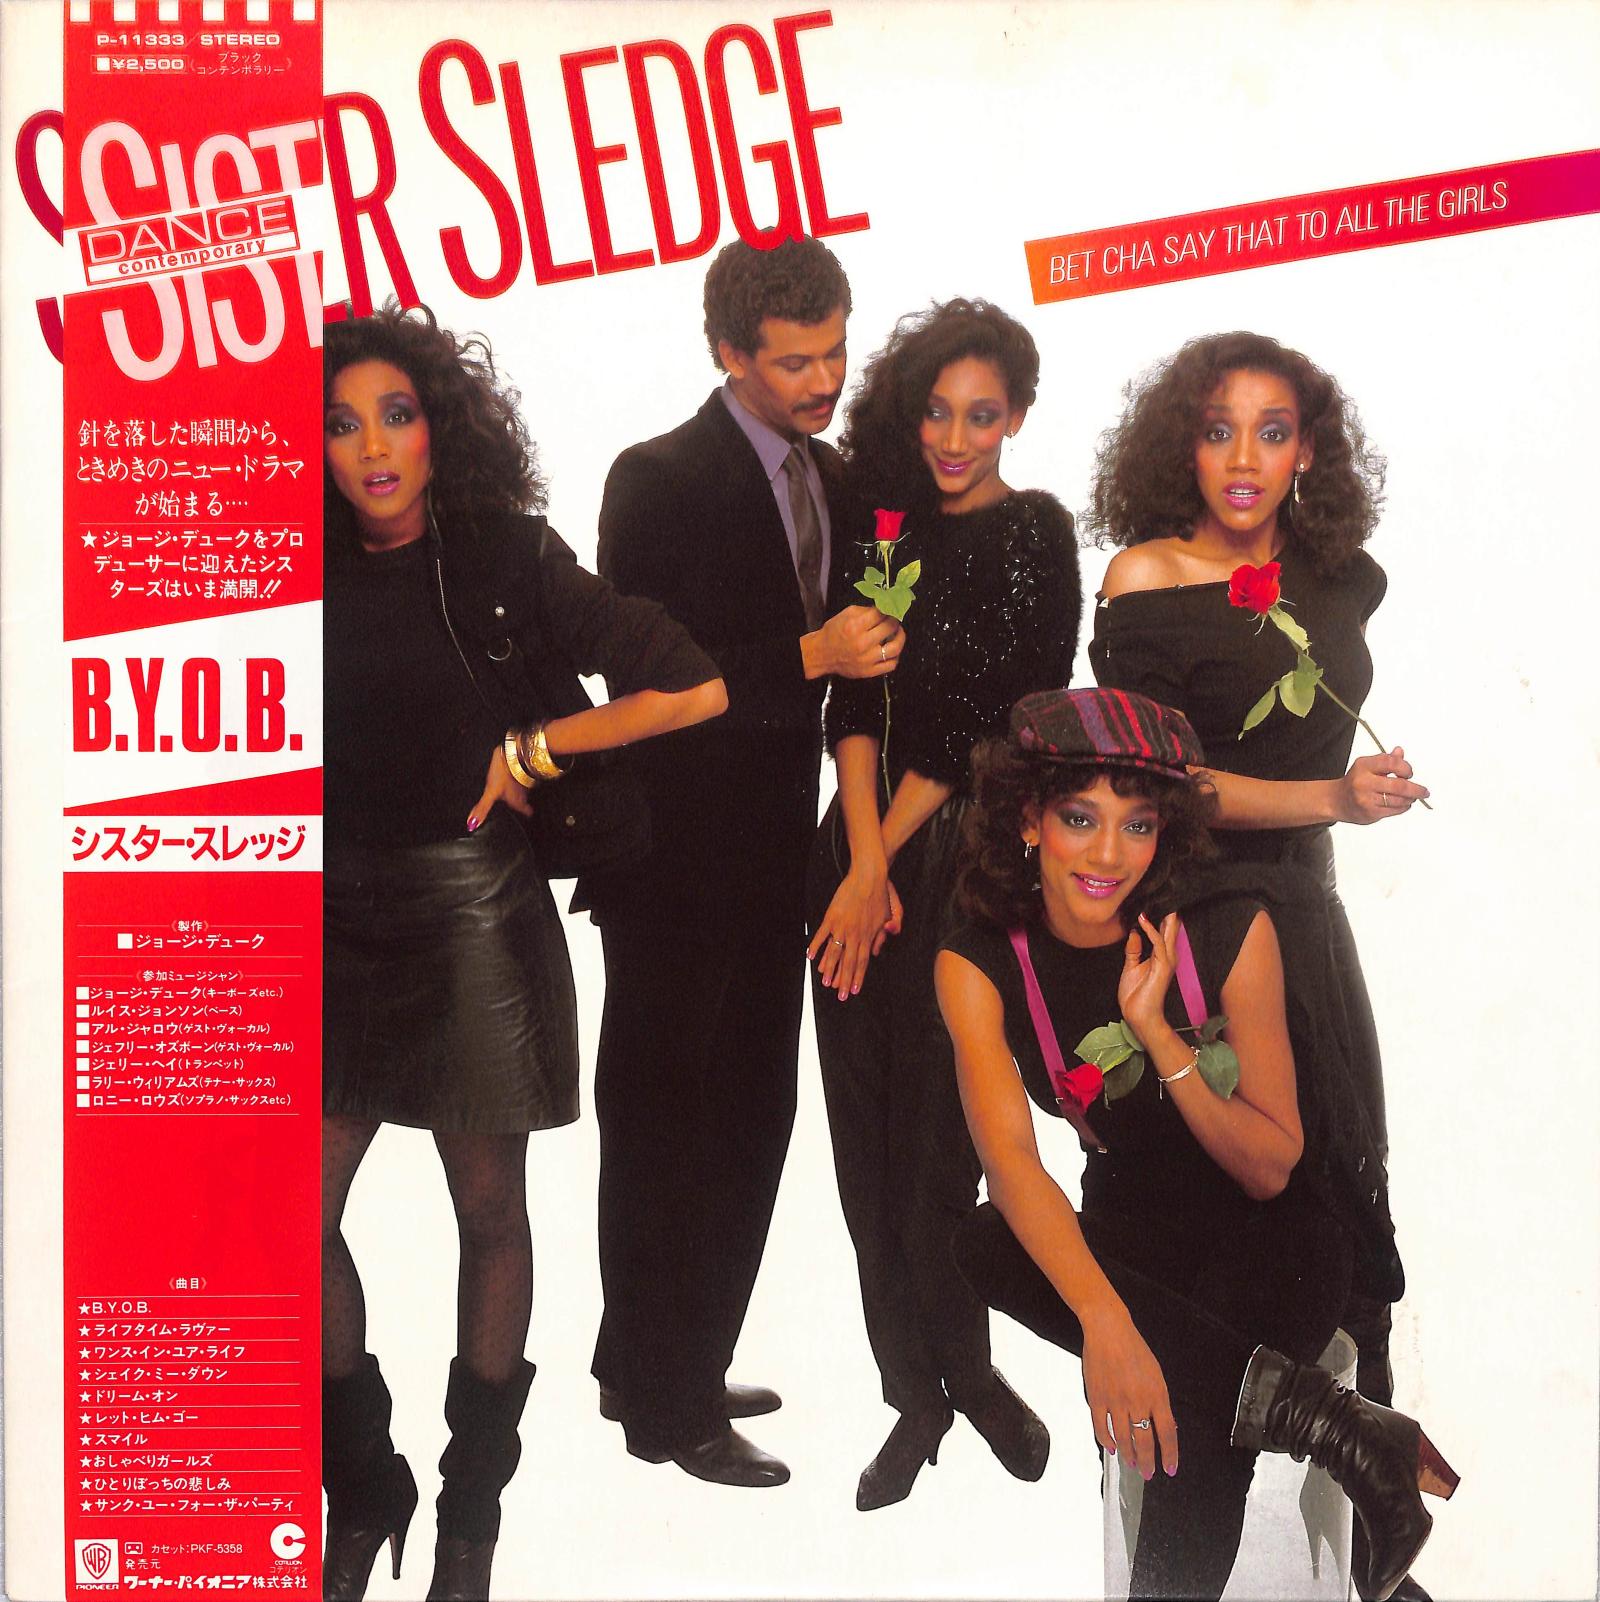 SISTER SLEDGE - Bet Cha Say That To All The Girls